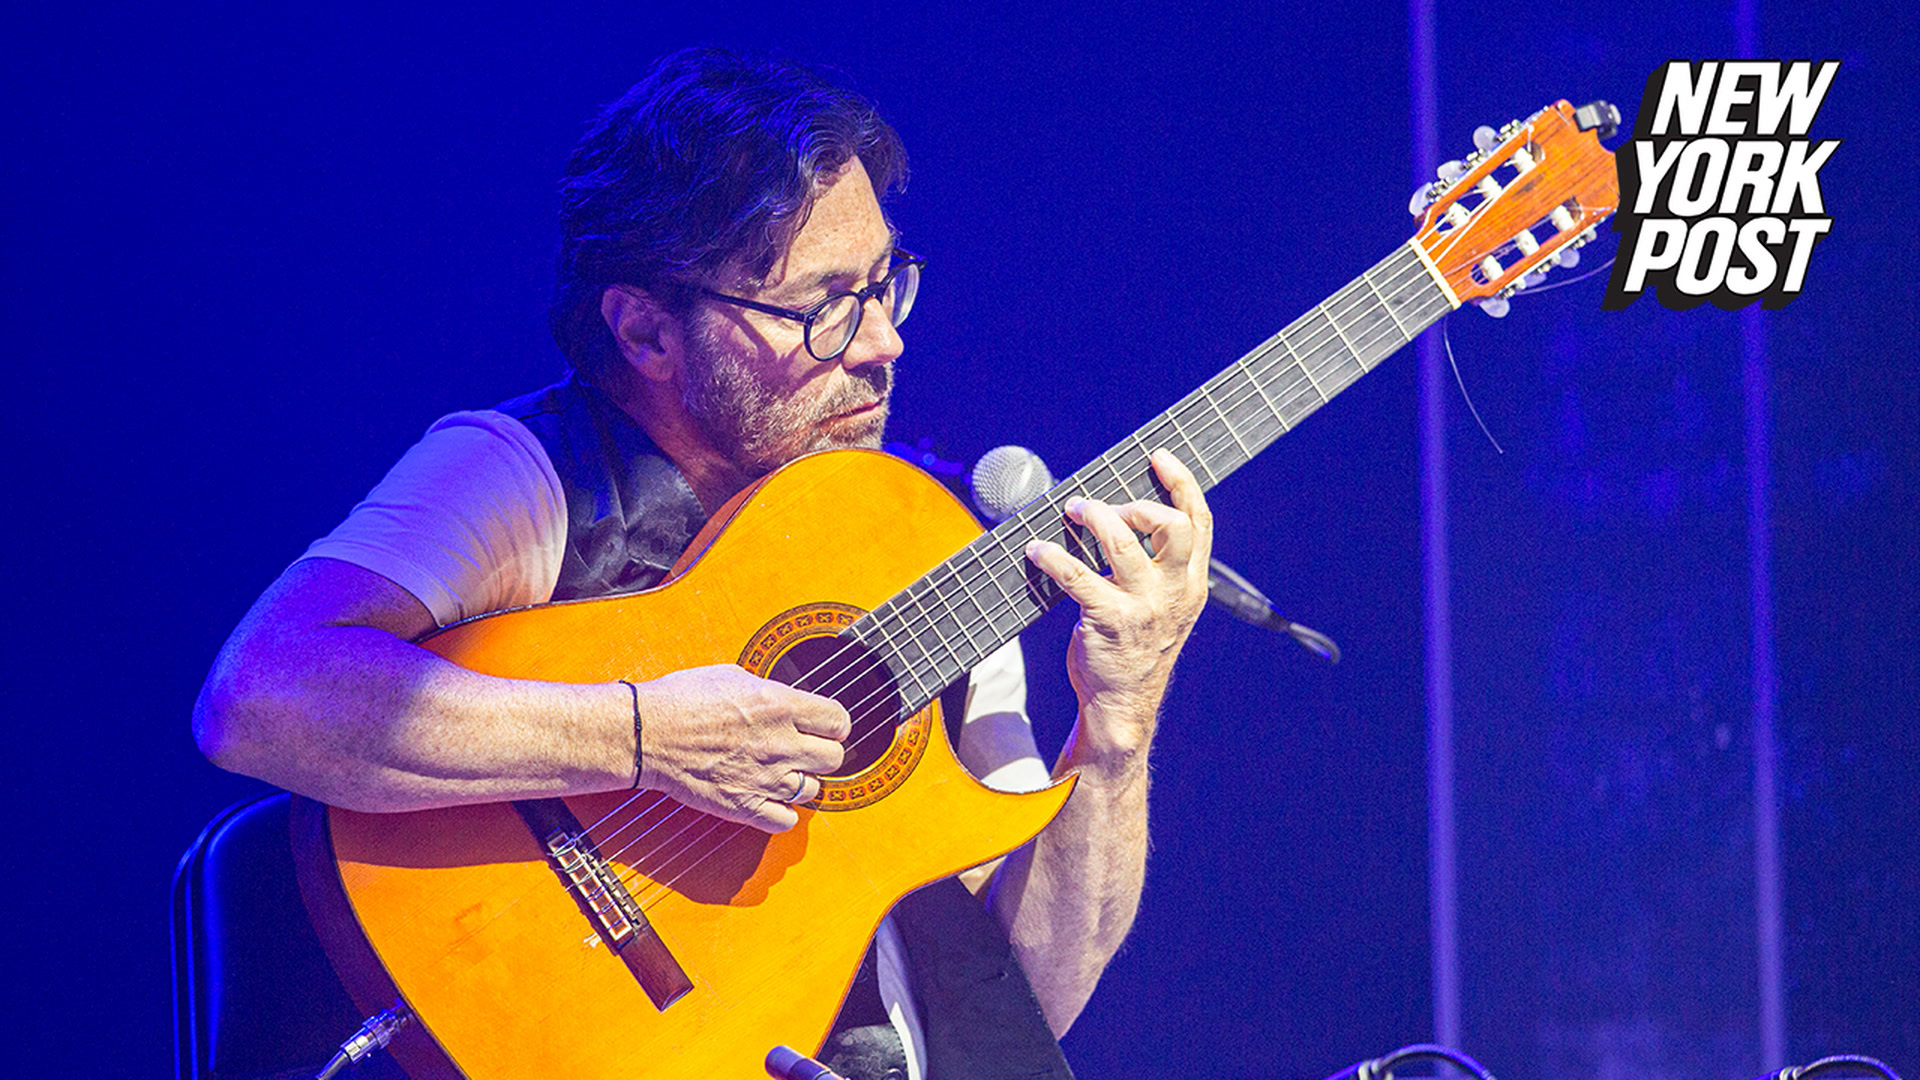 Al Di Meola suffers heart attack onstage while performing in Romania